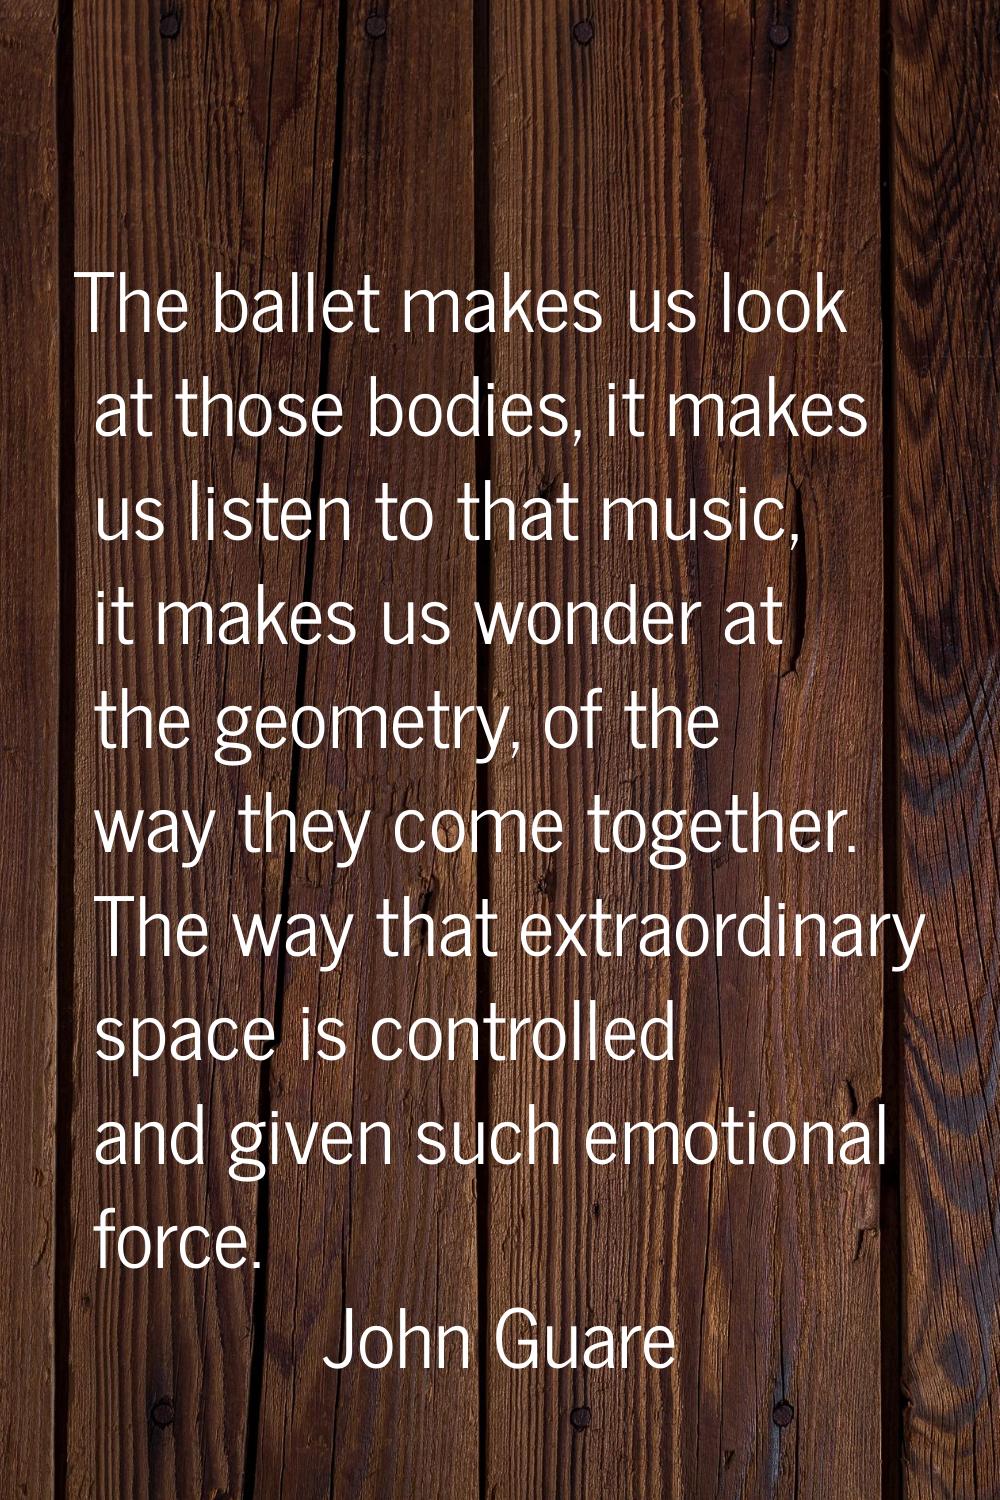 The ballet makes us look at those bodies, it makes us listen to that music, it makes us wonder at t